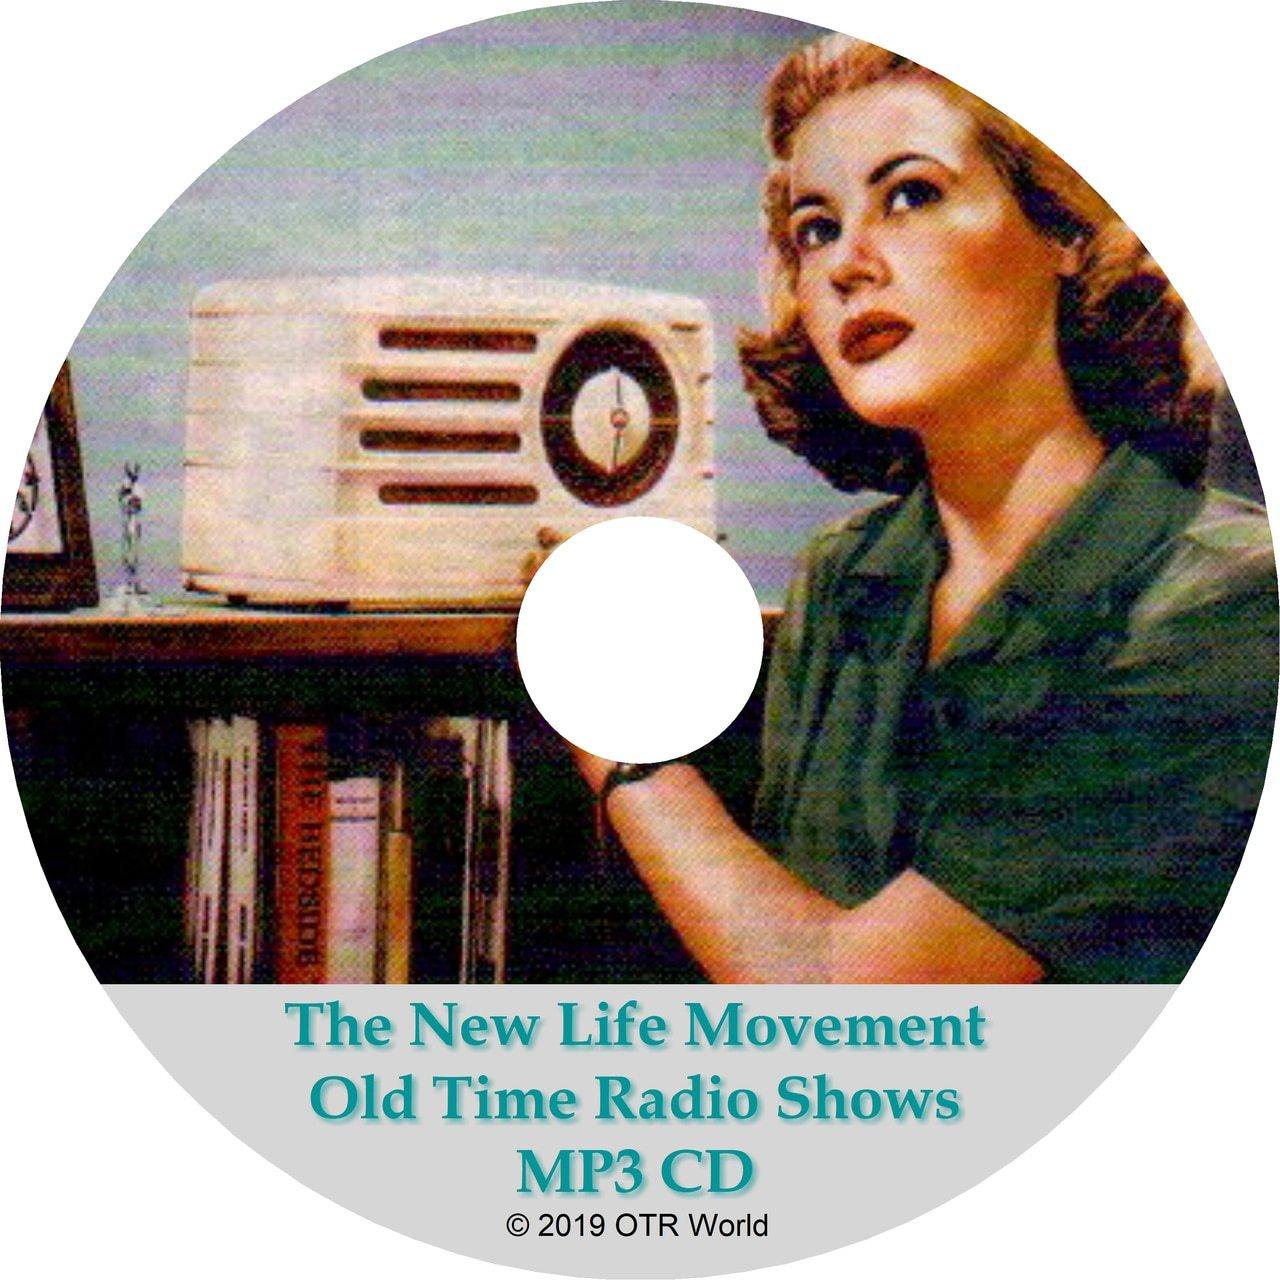 The New Life Movement Old Time Radio Shows OTR 6 Episodes MP3 CD-R - OTR World